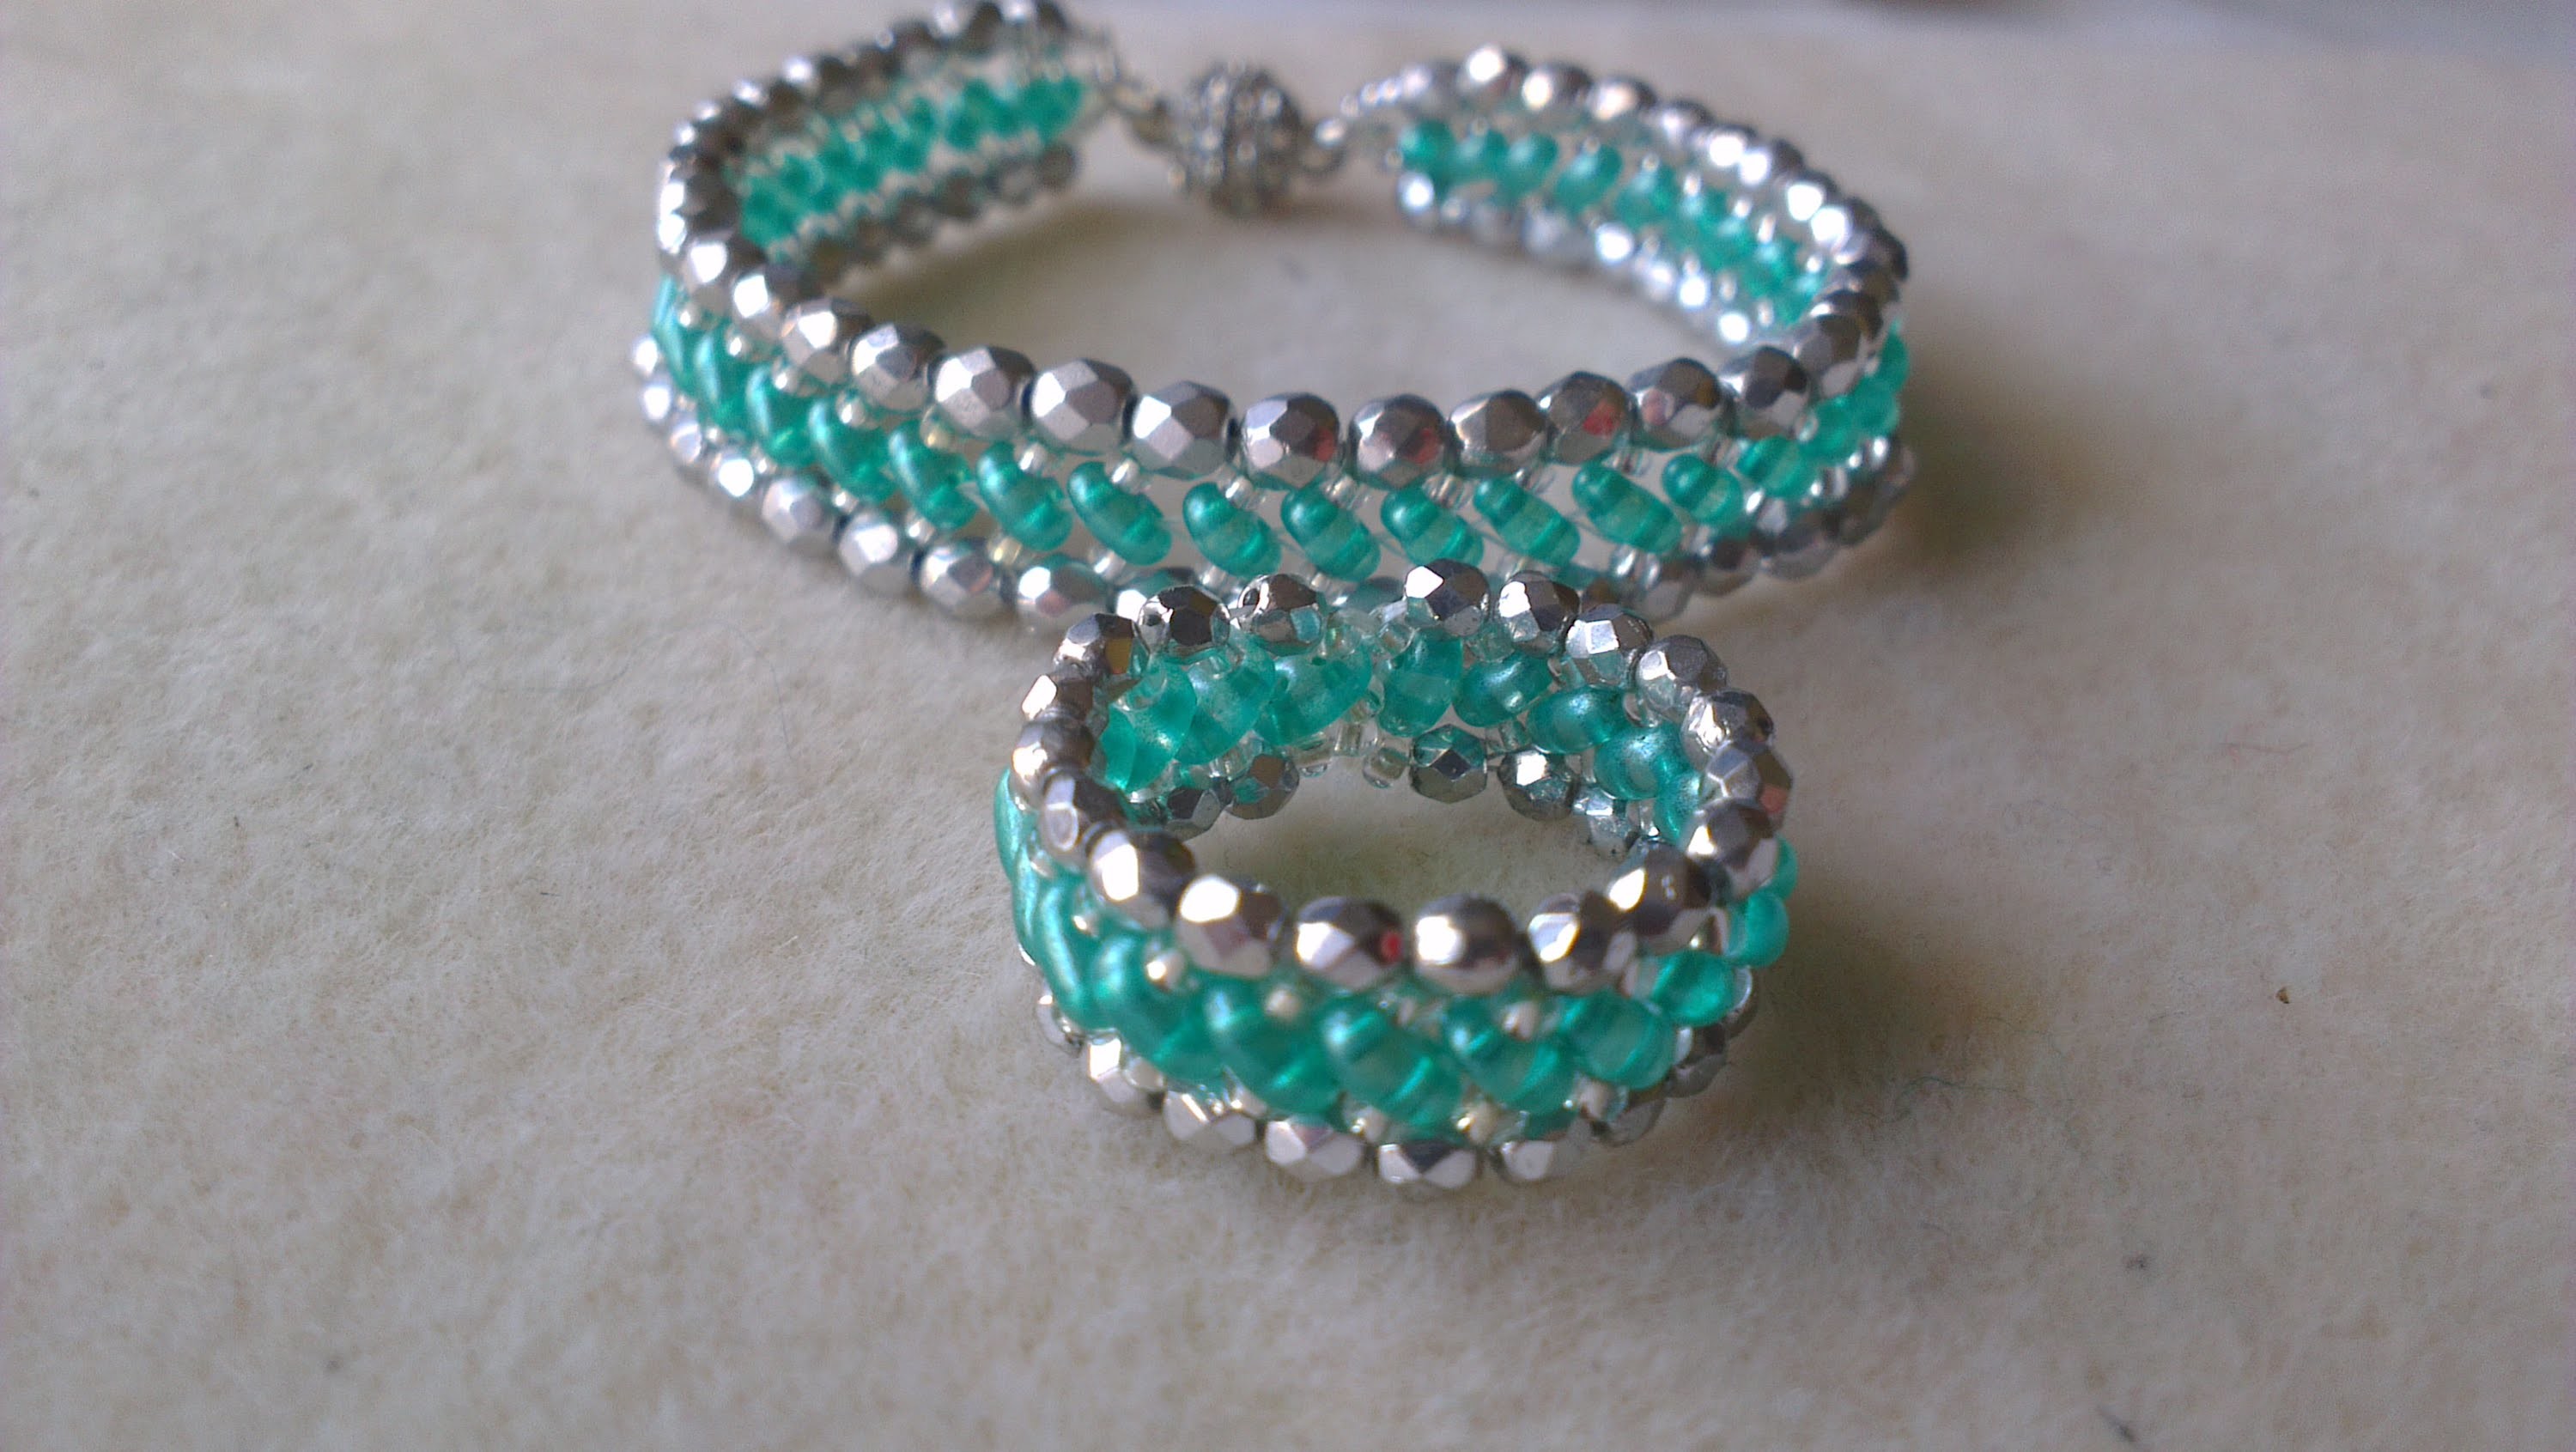 PULSERA Y ANILLO VERDE Y PLATA-BRACELET AND RING LIGHT EMERALD AND SILVER COLOR.